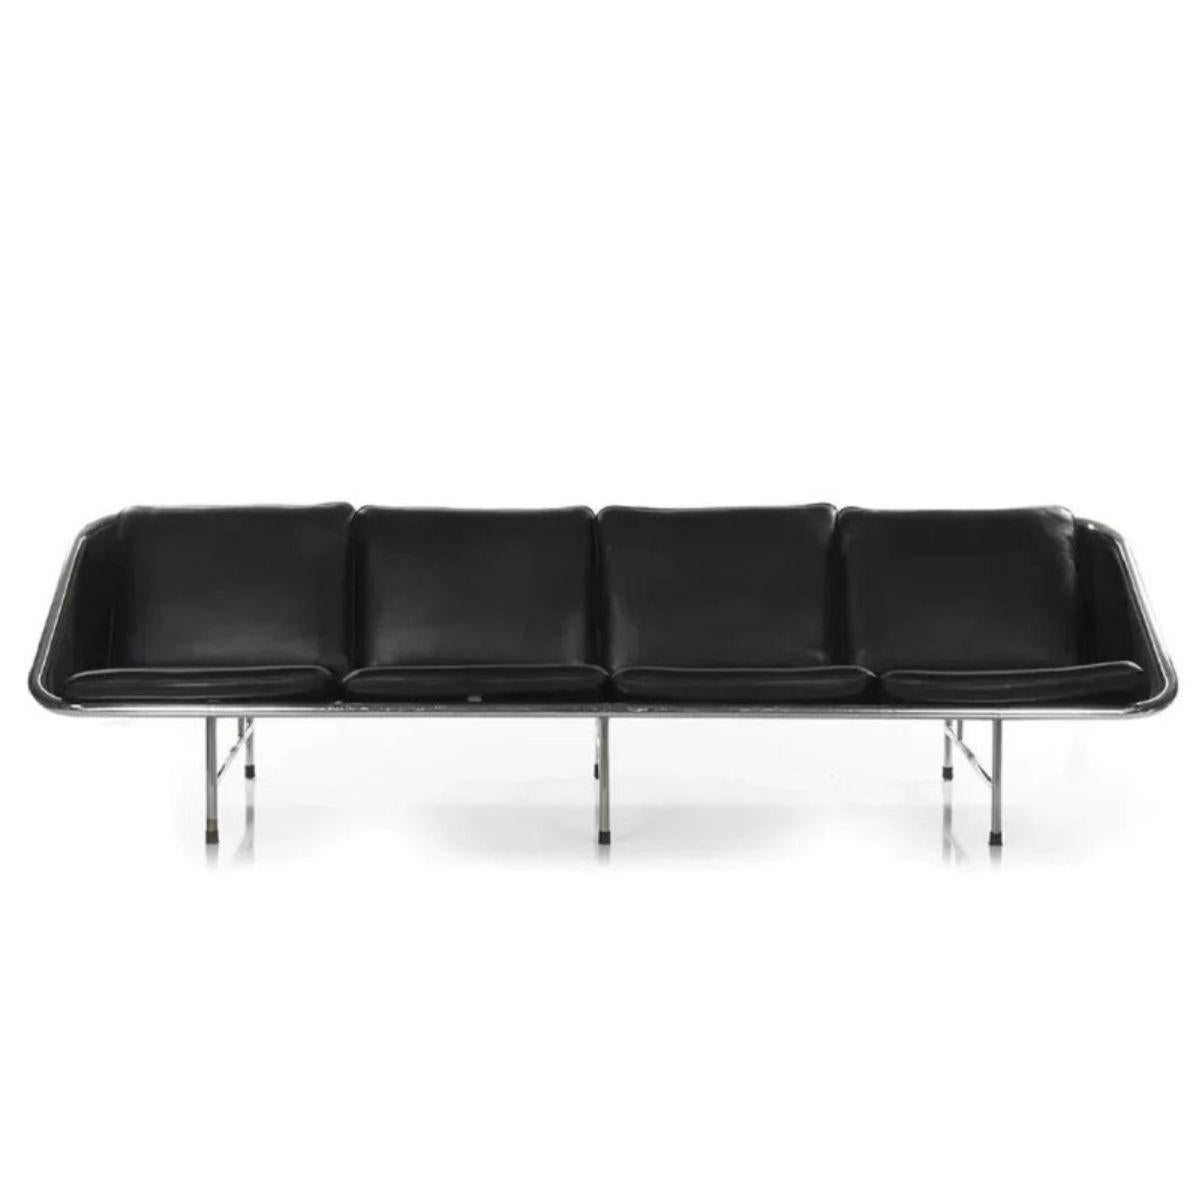 Four seat leather and chrome sling sofa model 6833 by George Nelson for Herman Miller. With original IBM inventory label. USA, 1960’s. 